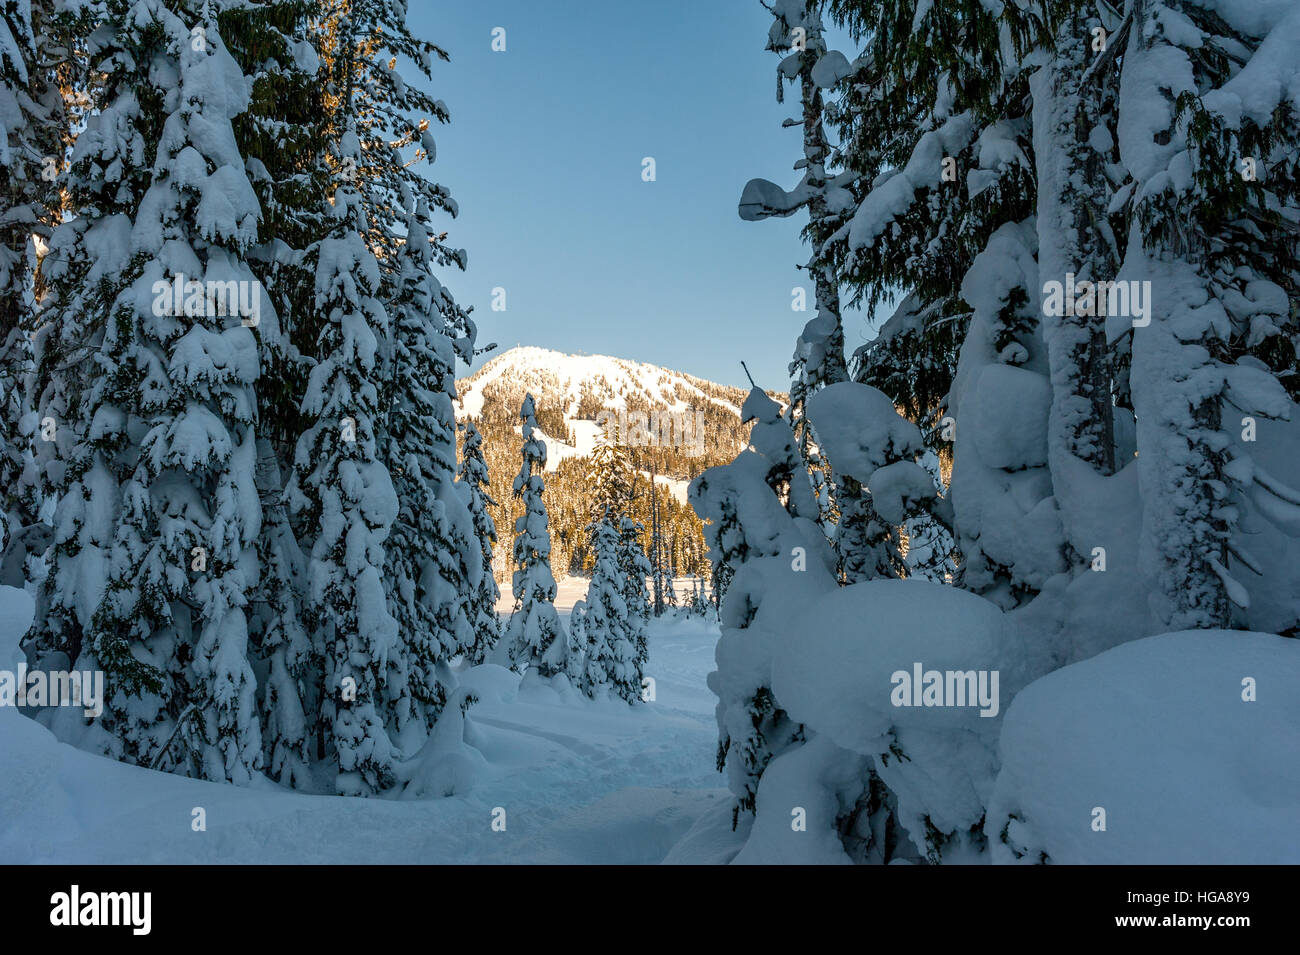 Winter view of Mount Washington, Strathcona Provincial Park, British Columbia Canada through snow covered trees Stock Photo